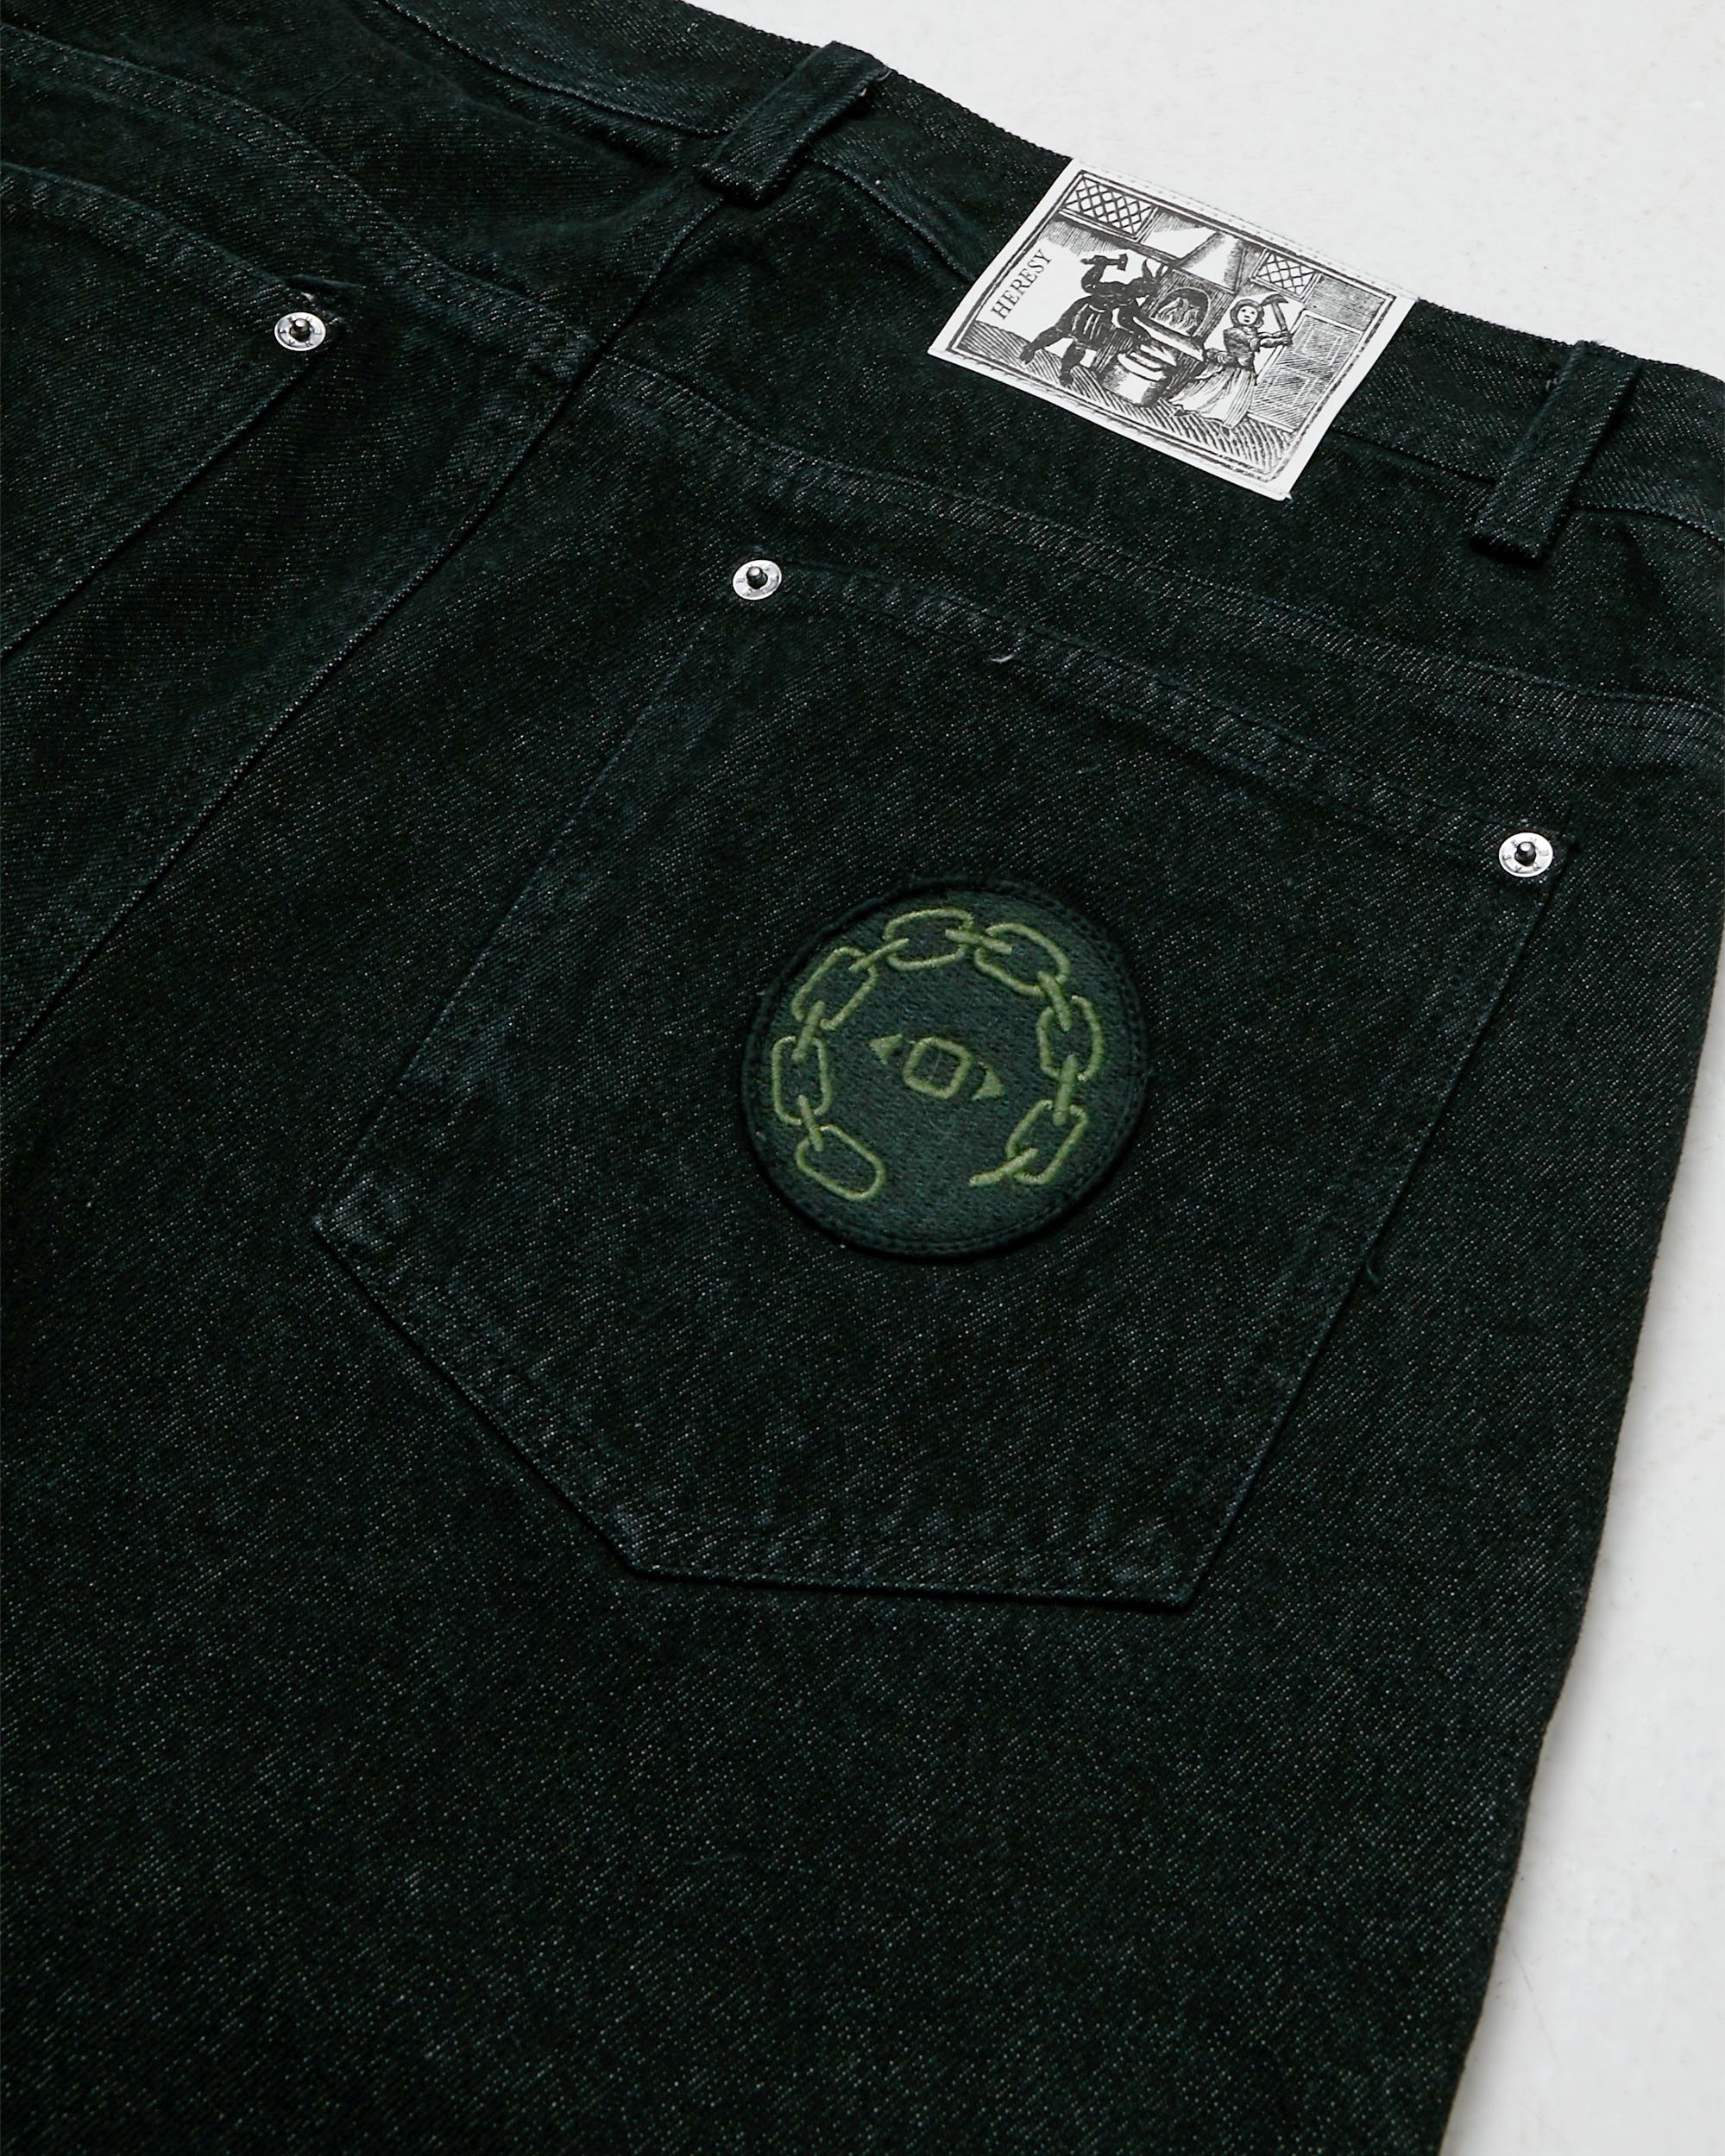 Trouser patches ghost bat cemetery XL patches organic jeans